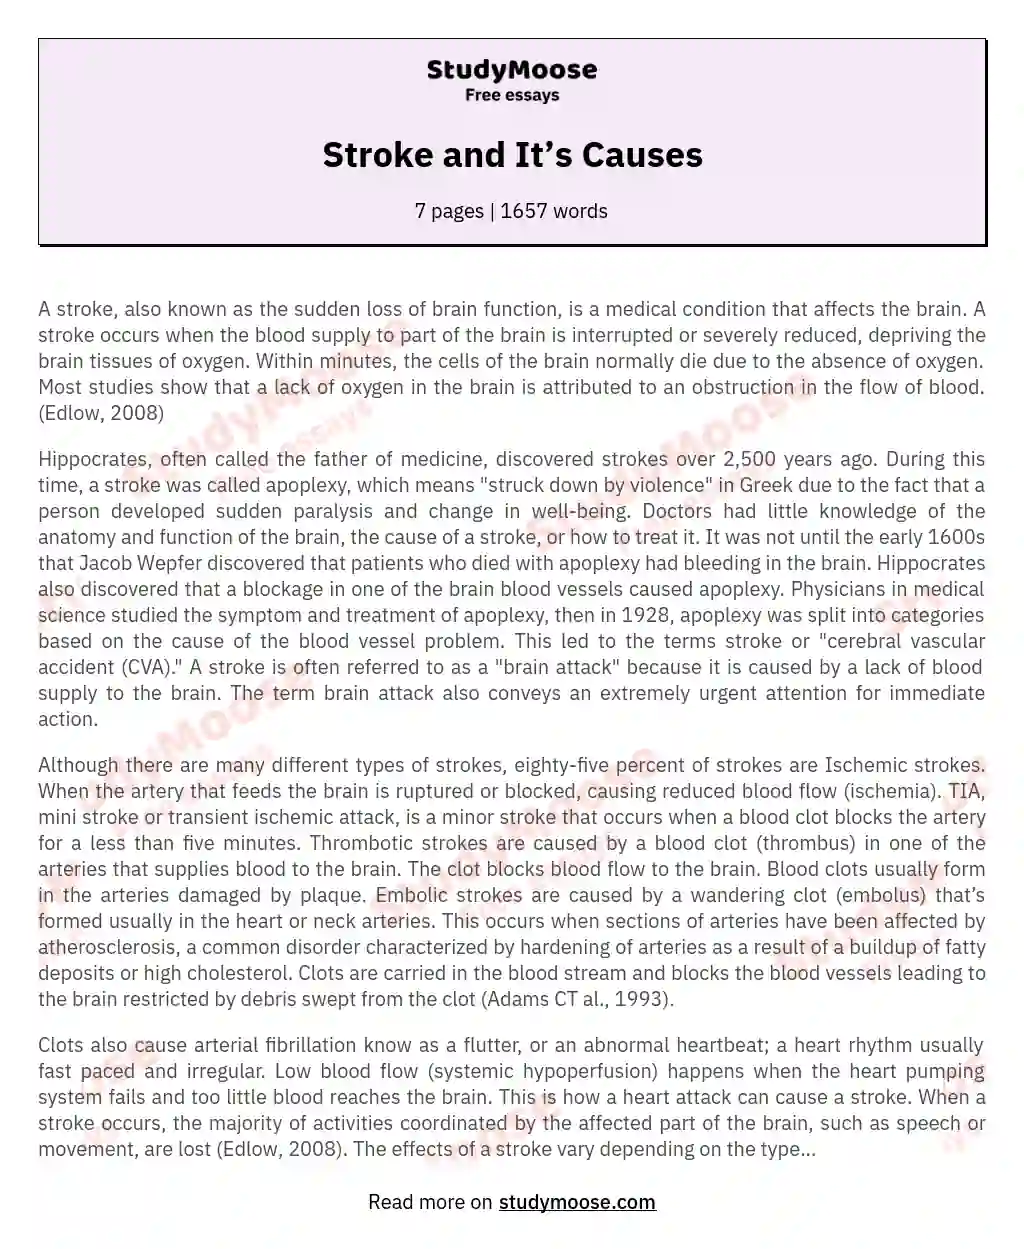 Stroke and It’s Causes essay